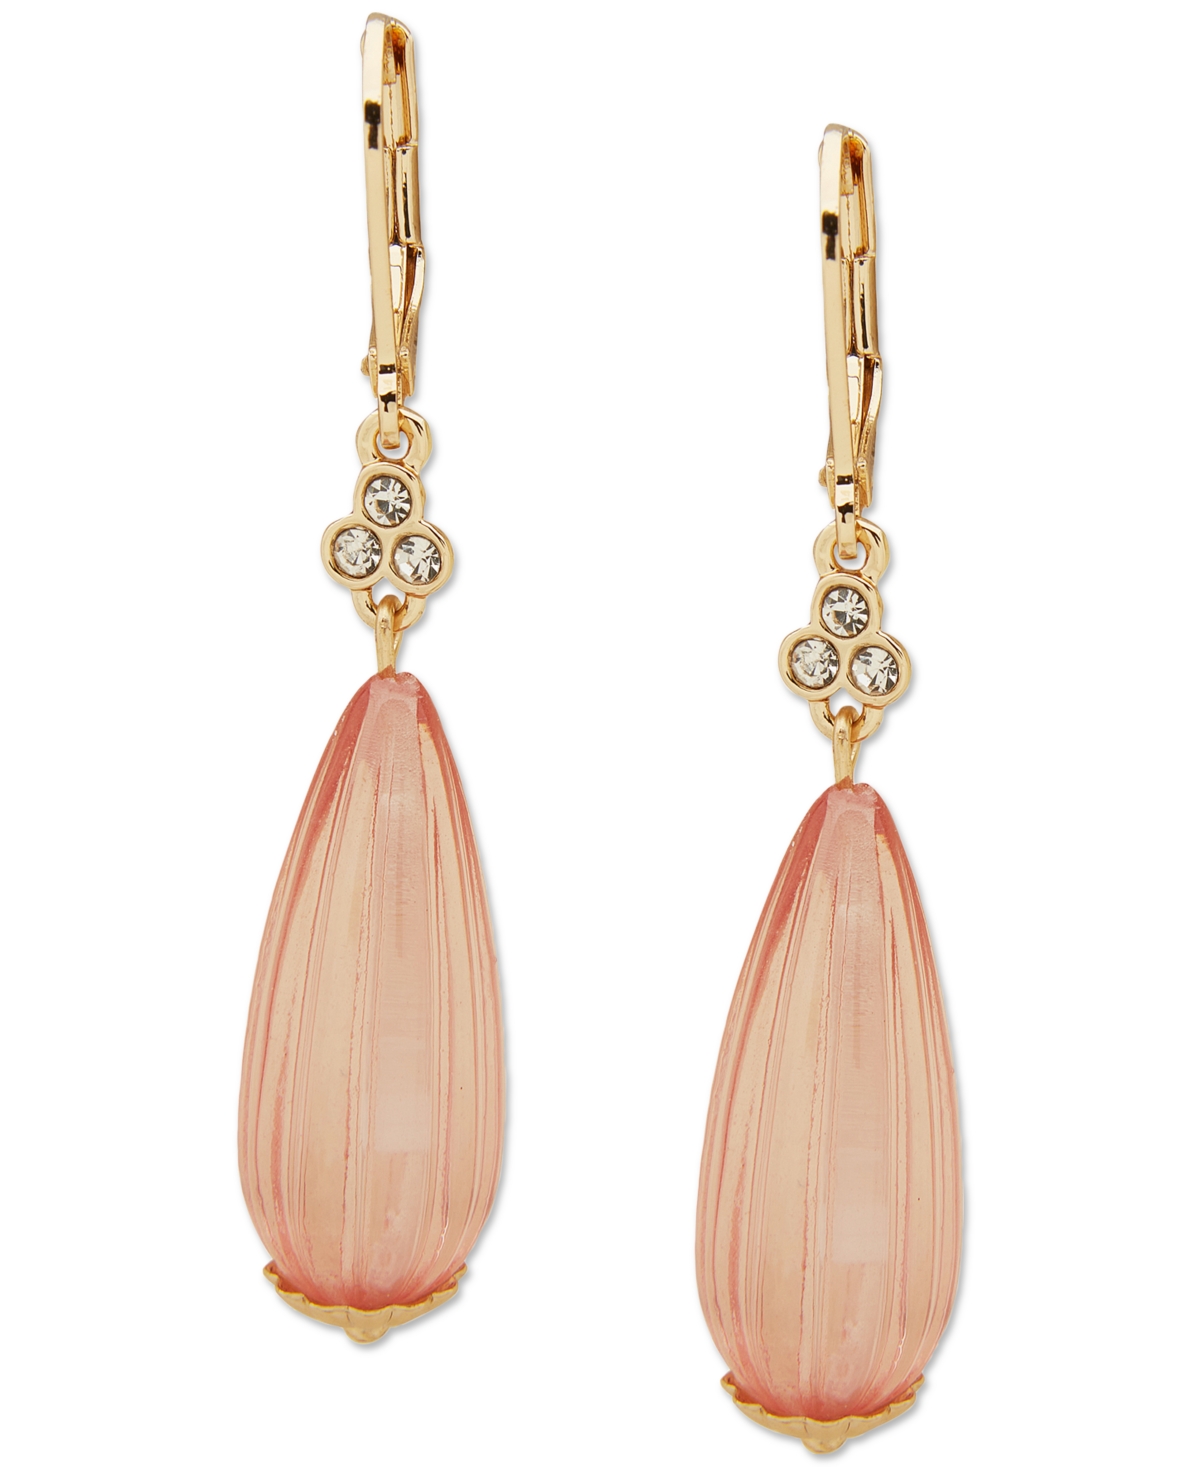 Gold-Tone Pave & Fluted Bead Drop Earrings - Blush